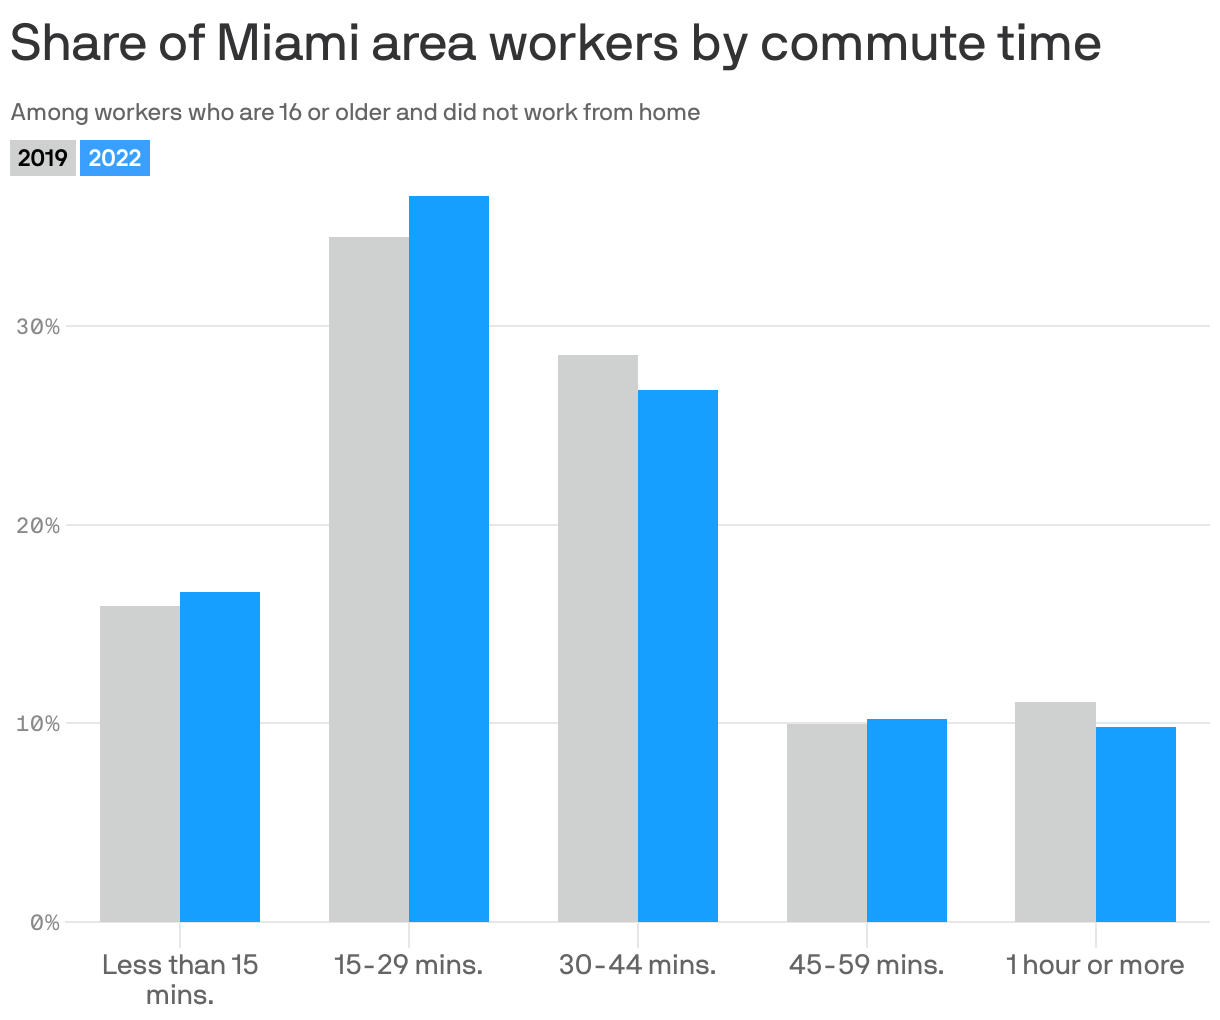 Share of Miami area workers by commute time